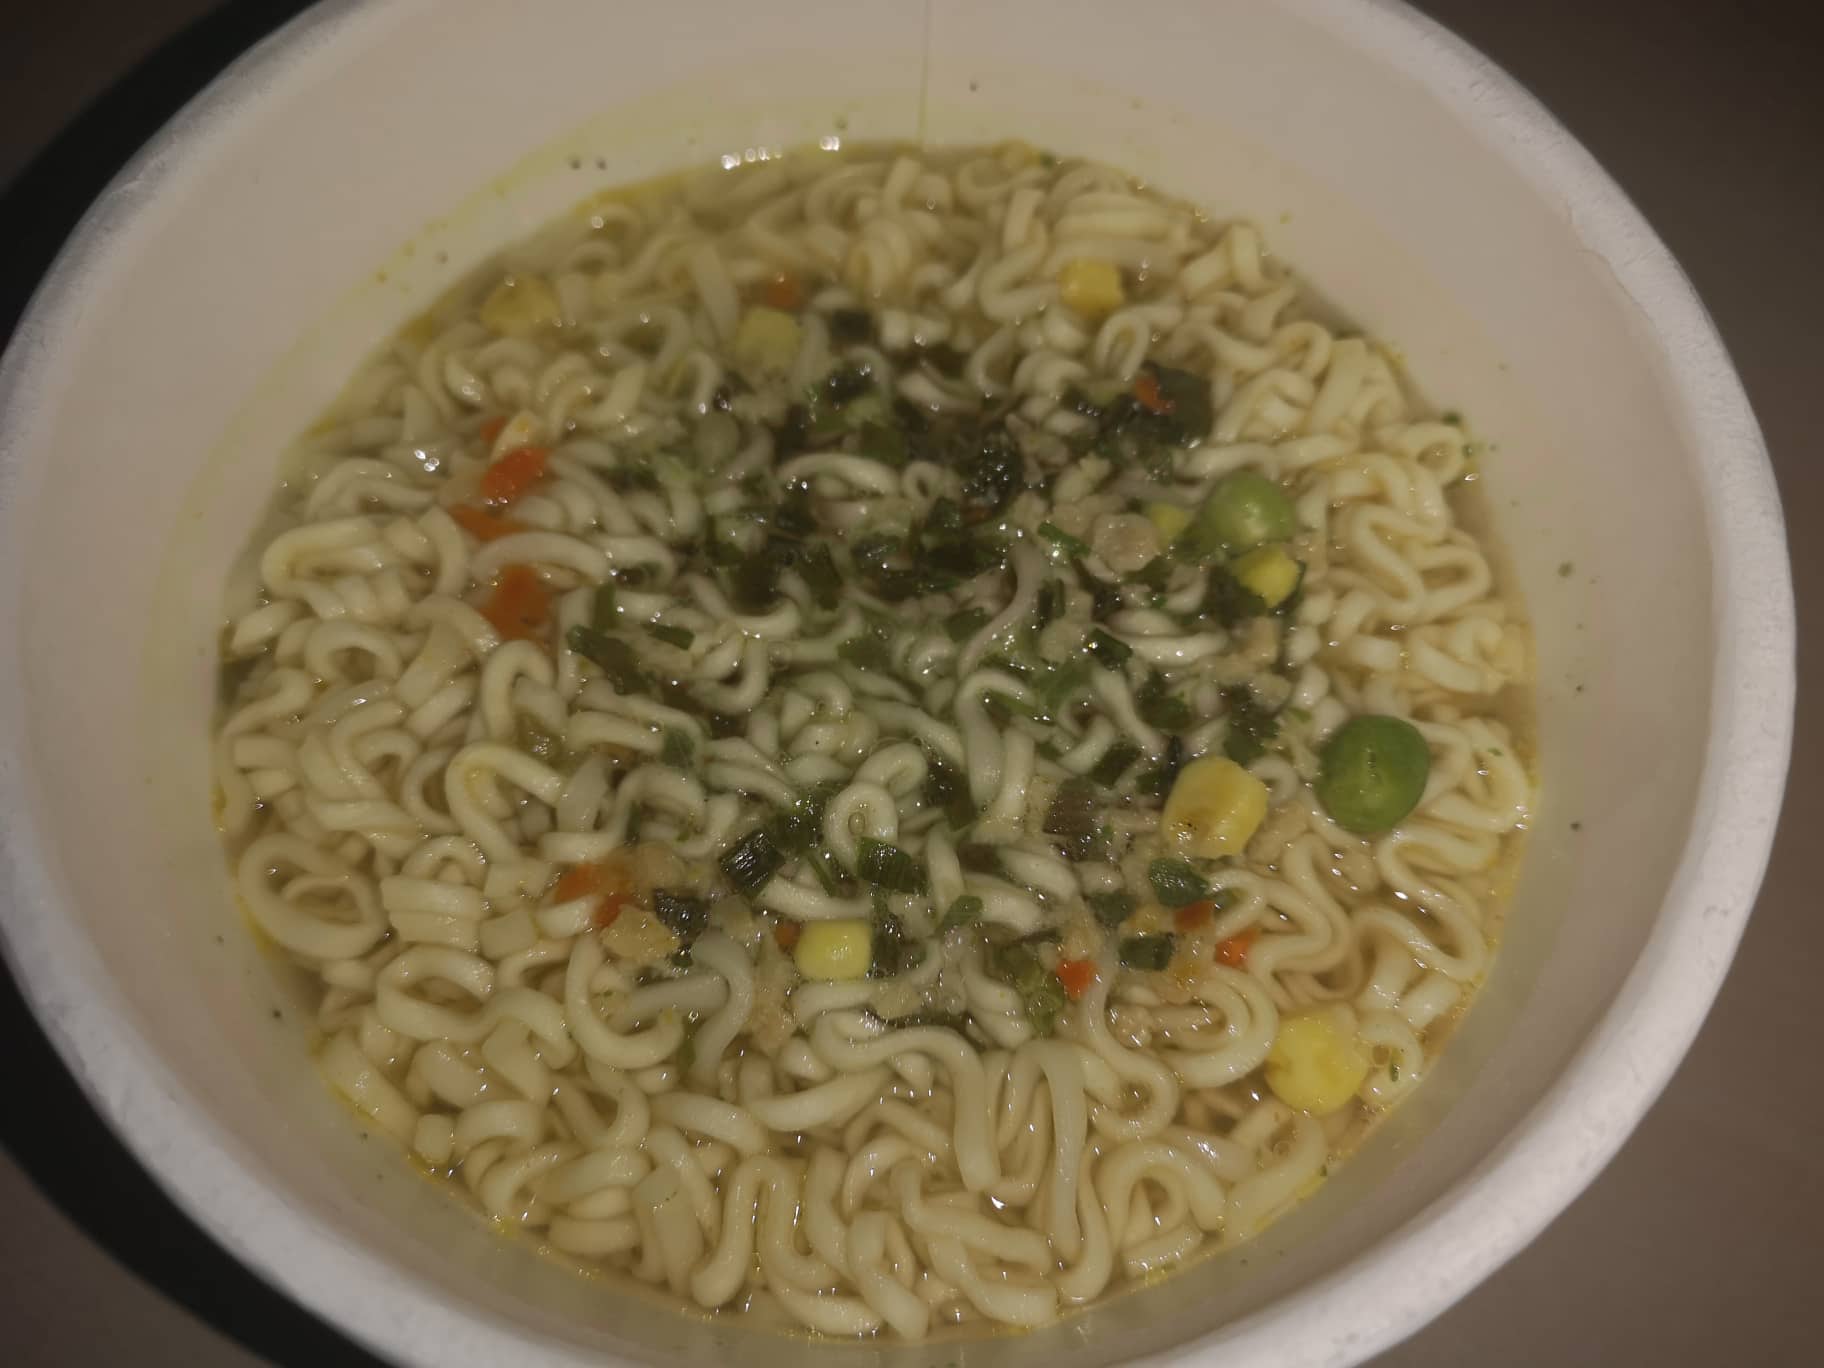 #1694: Rollton "Instant Noodles with Chicken Flavour"